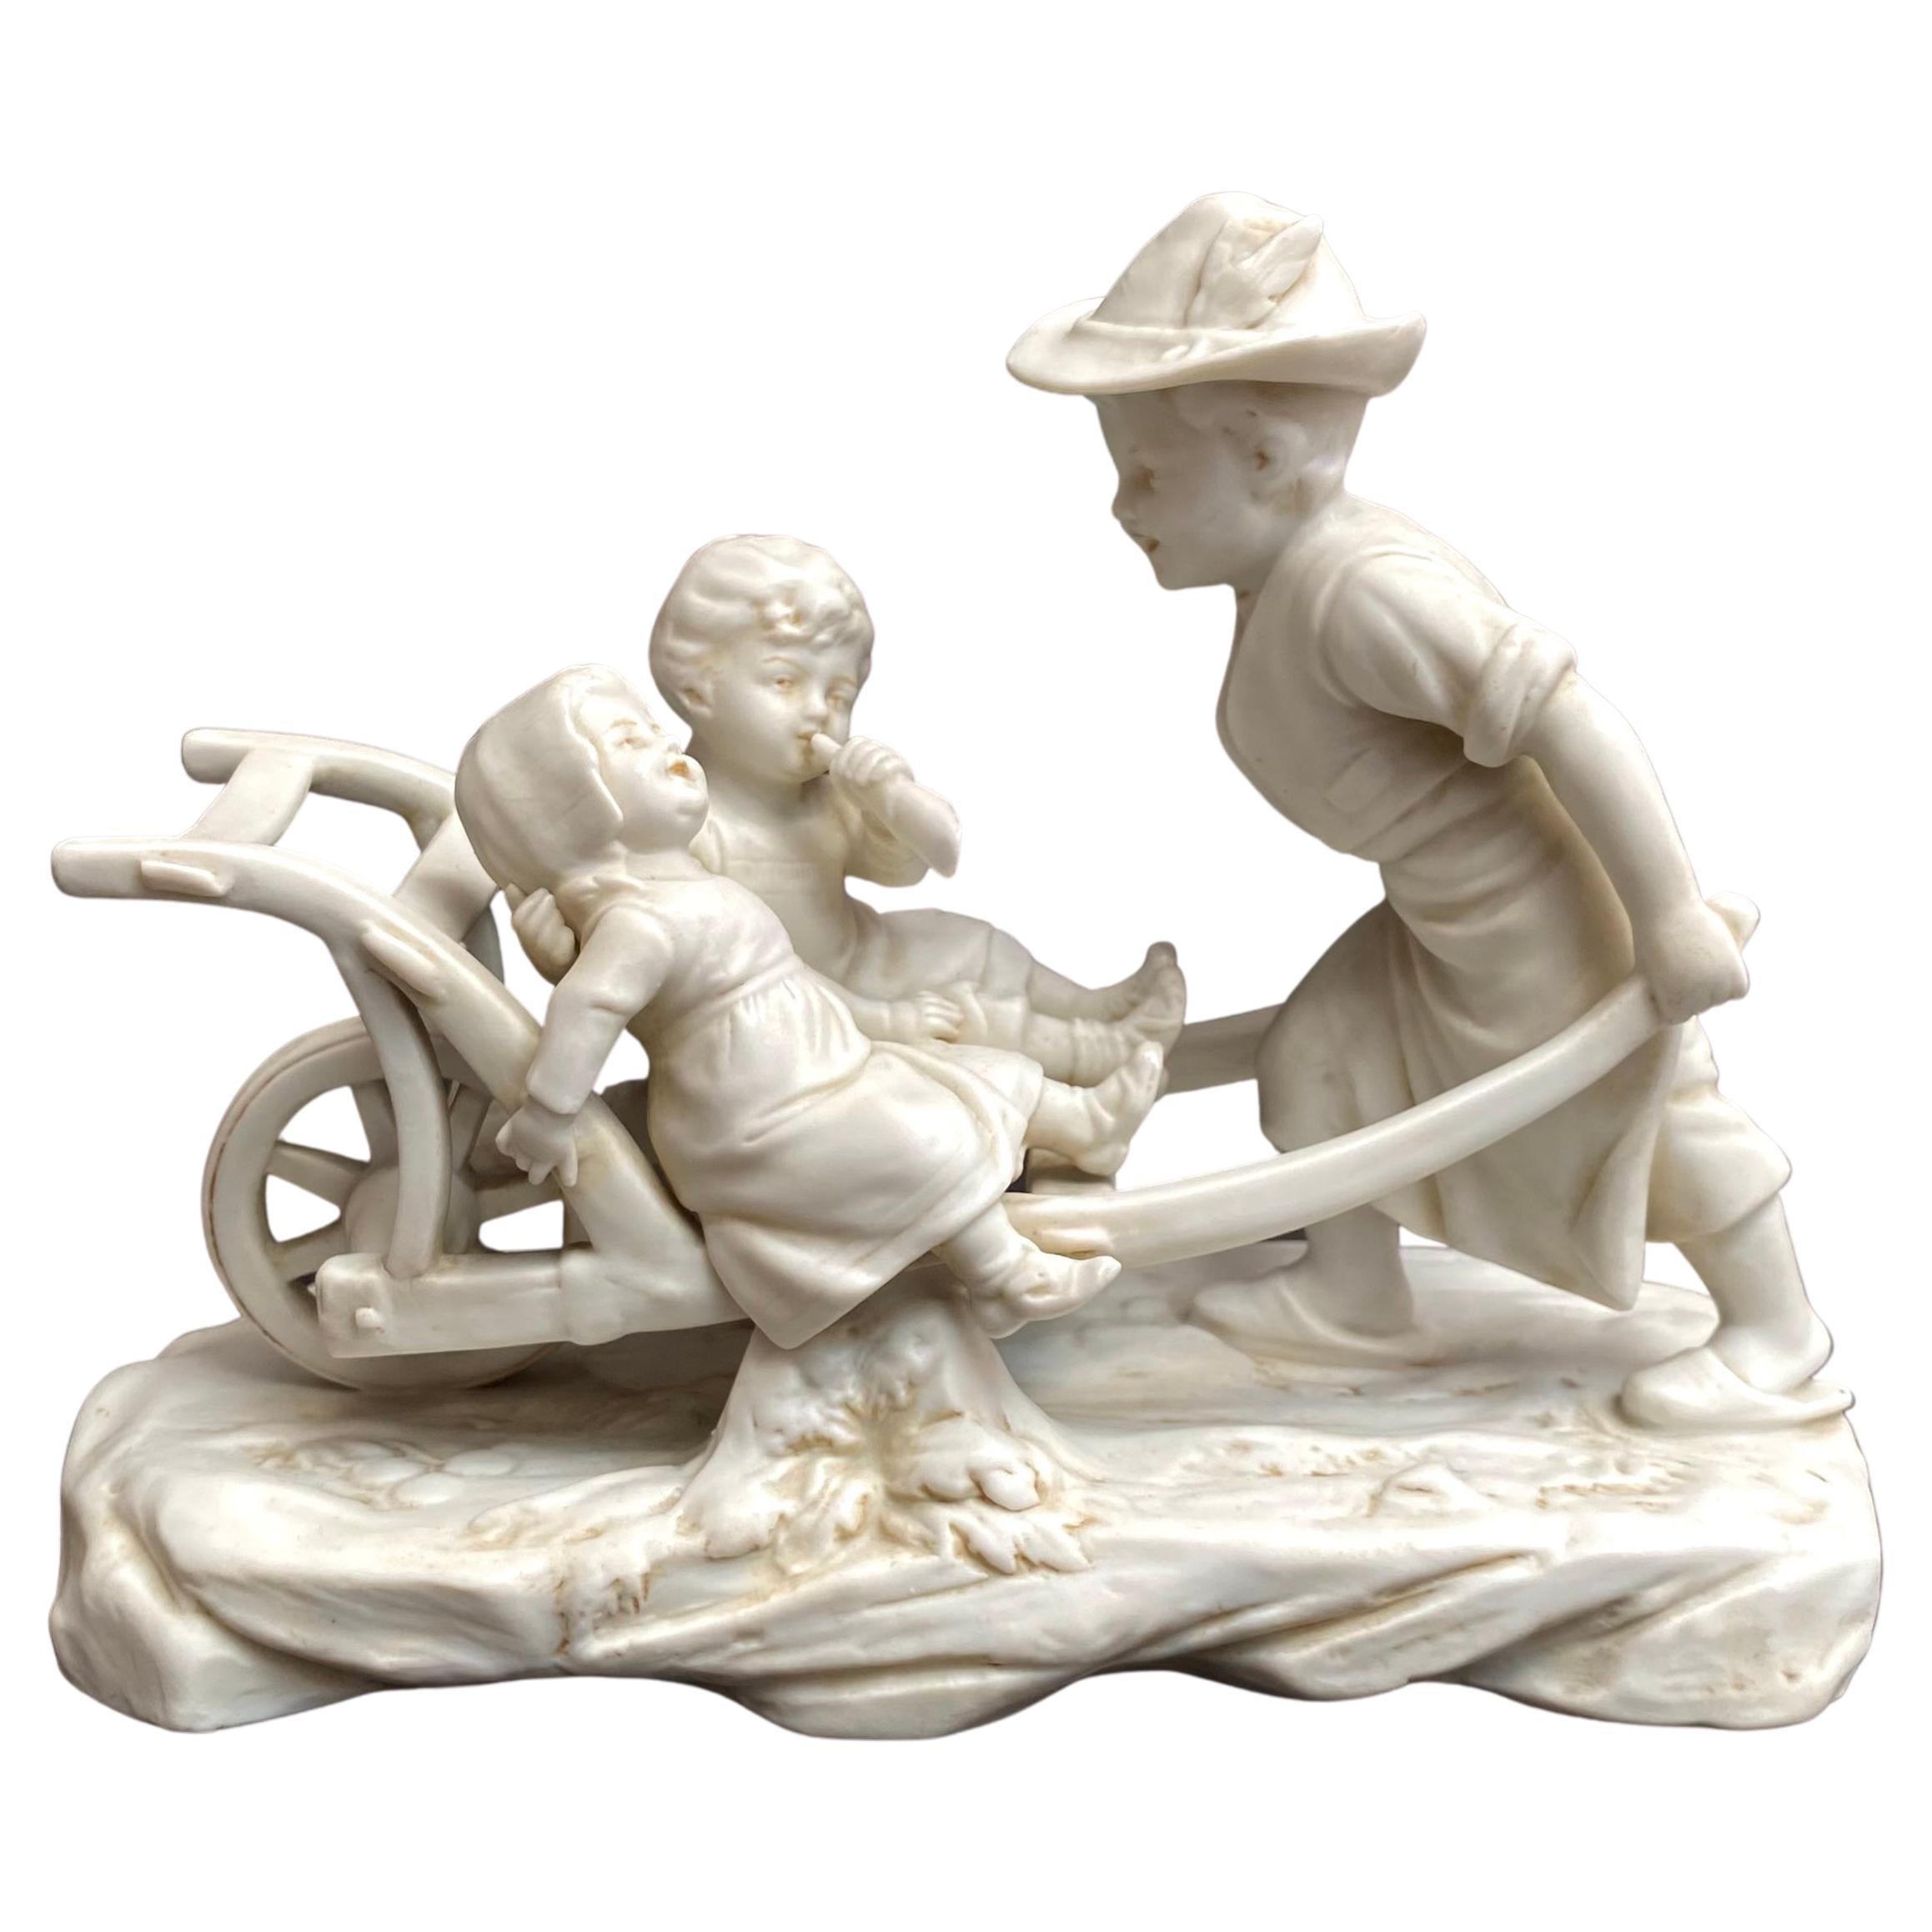 Unique Antique Figurine Lady Pulling Cart With Children, Germany, 1930s For Sale